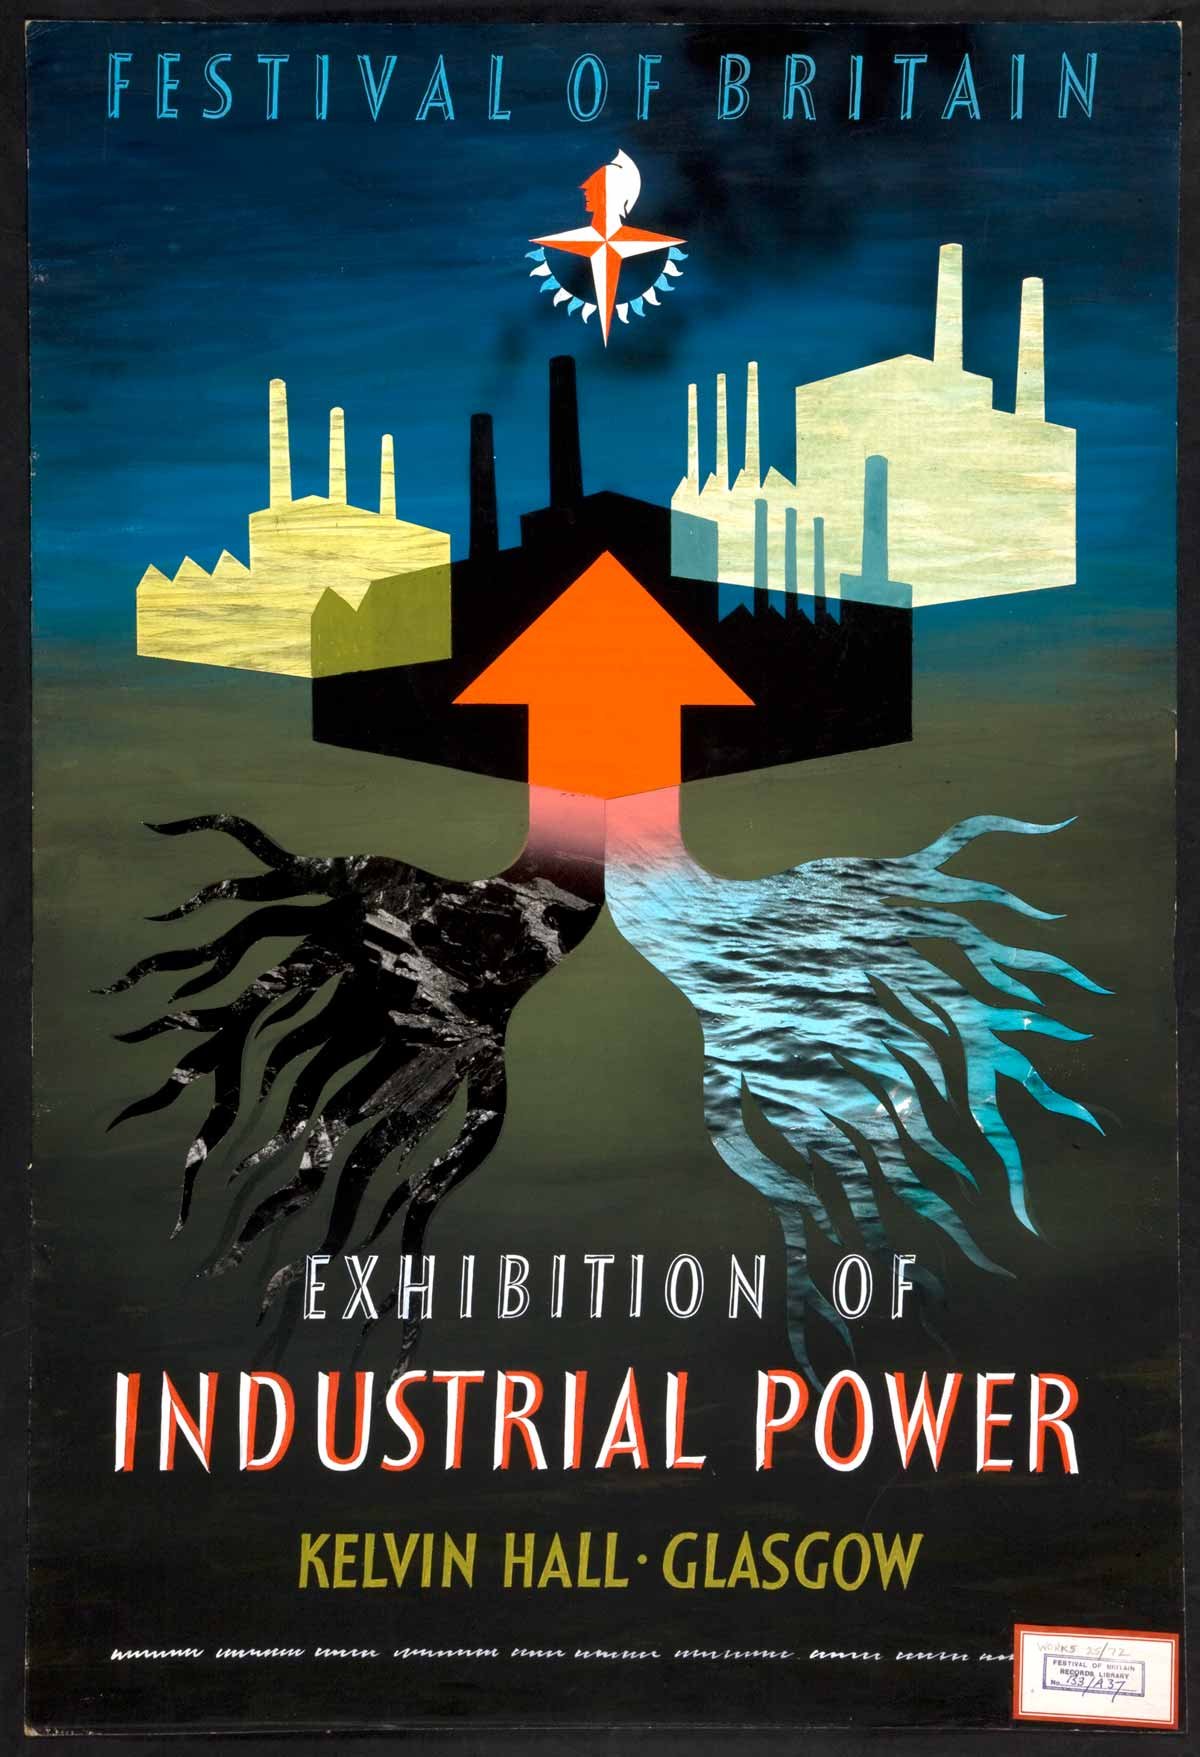 A black and a blue set of roots join to form a red arrow pointing up into 3 silhouetted factories.